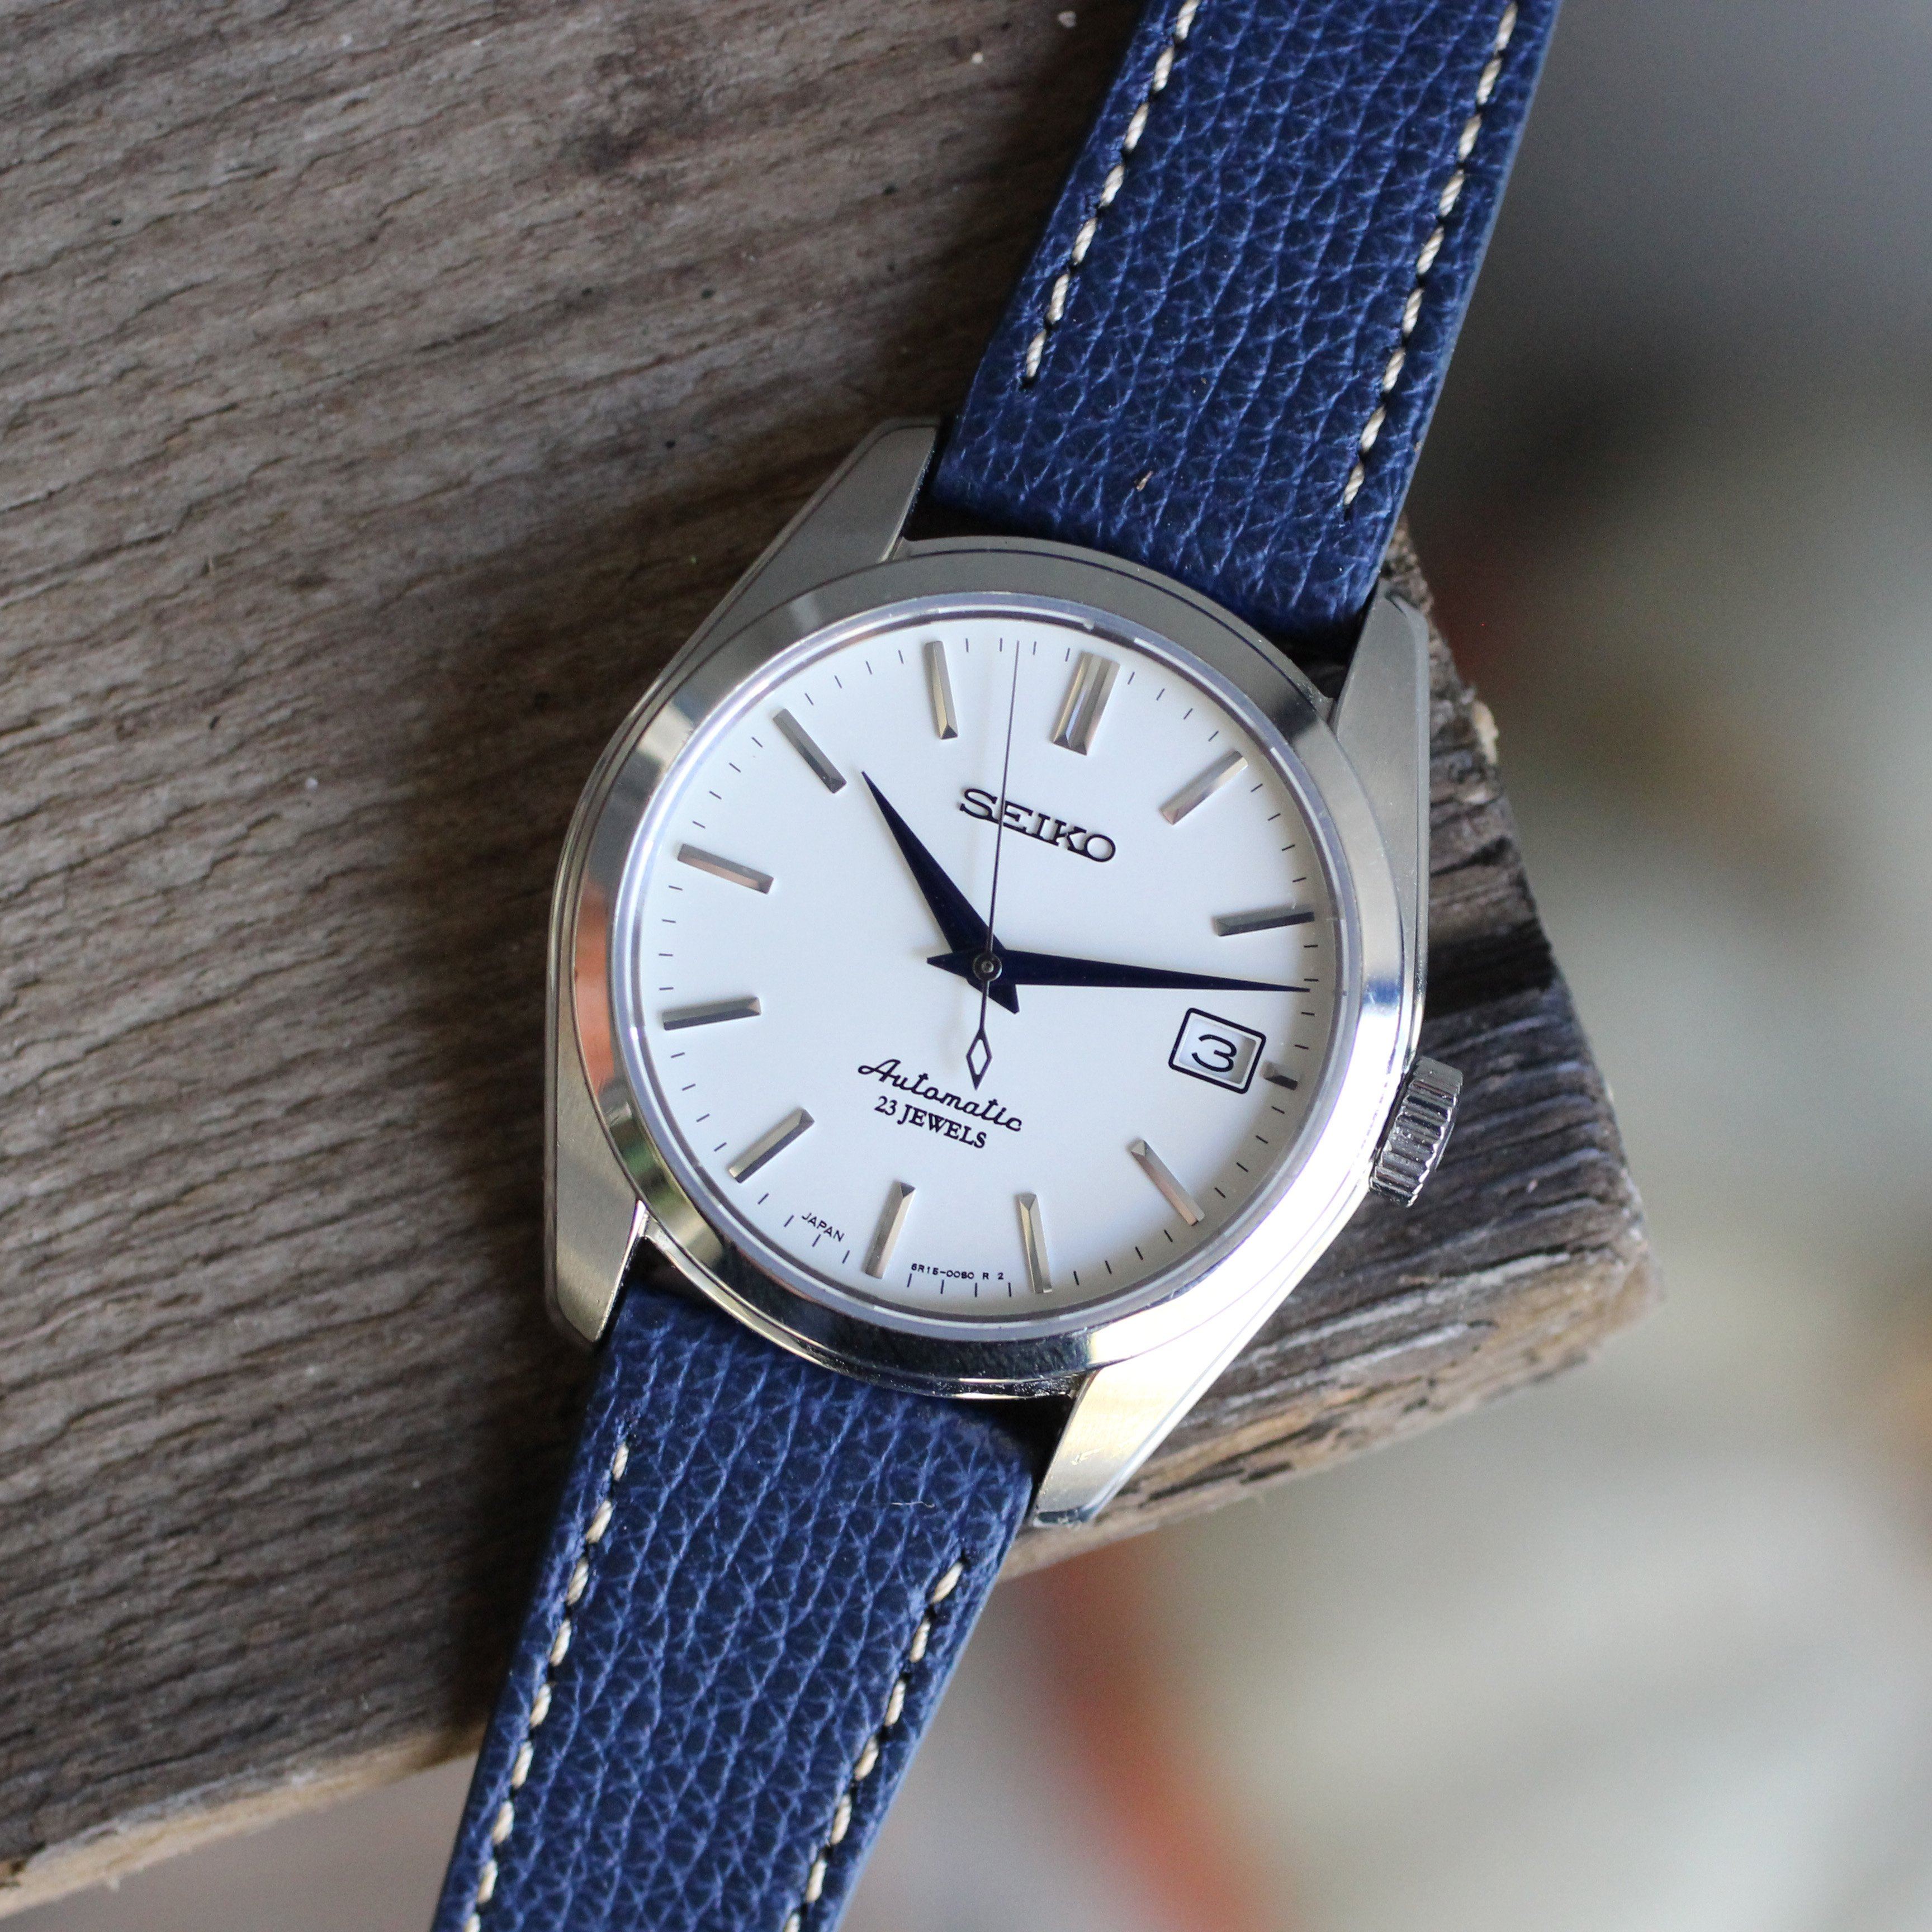 Seiko watch with Vario Italian leather watch strap